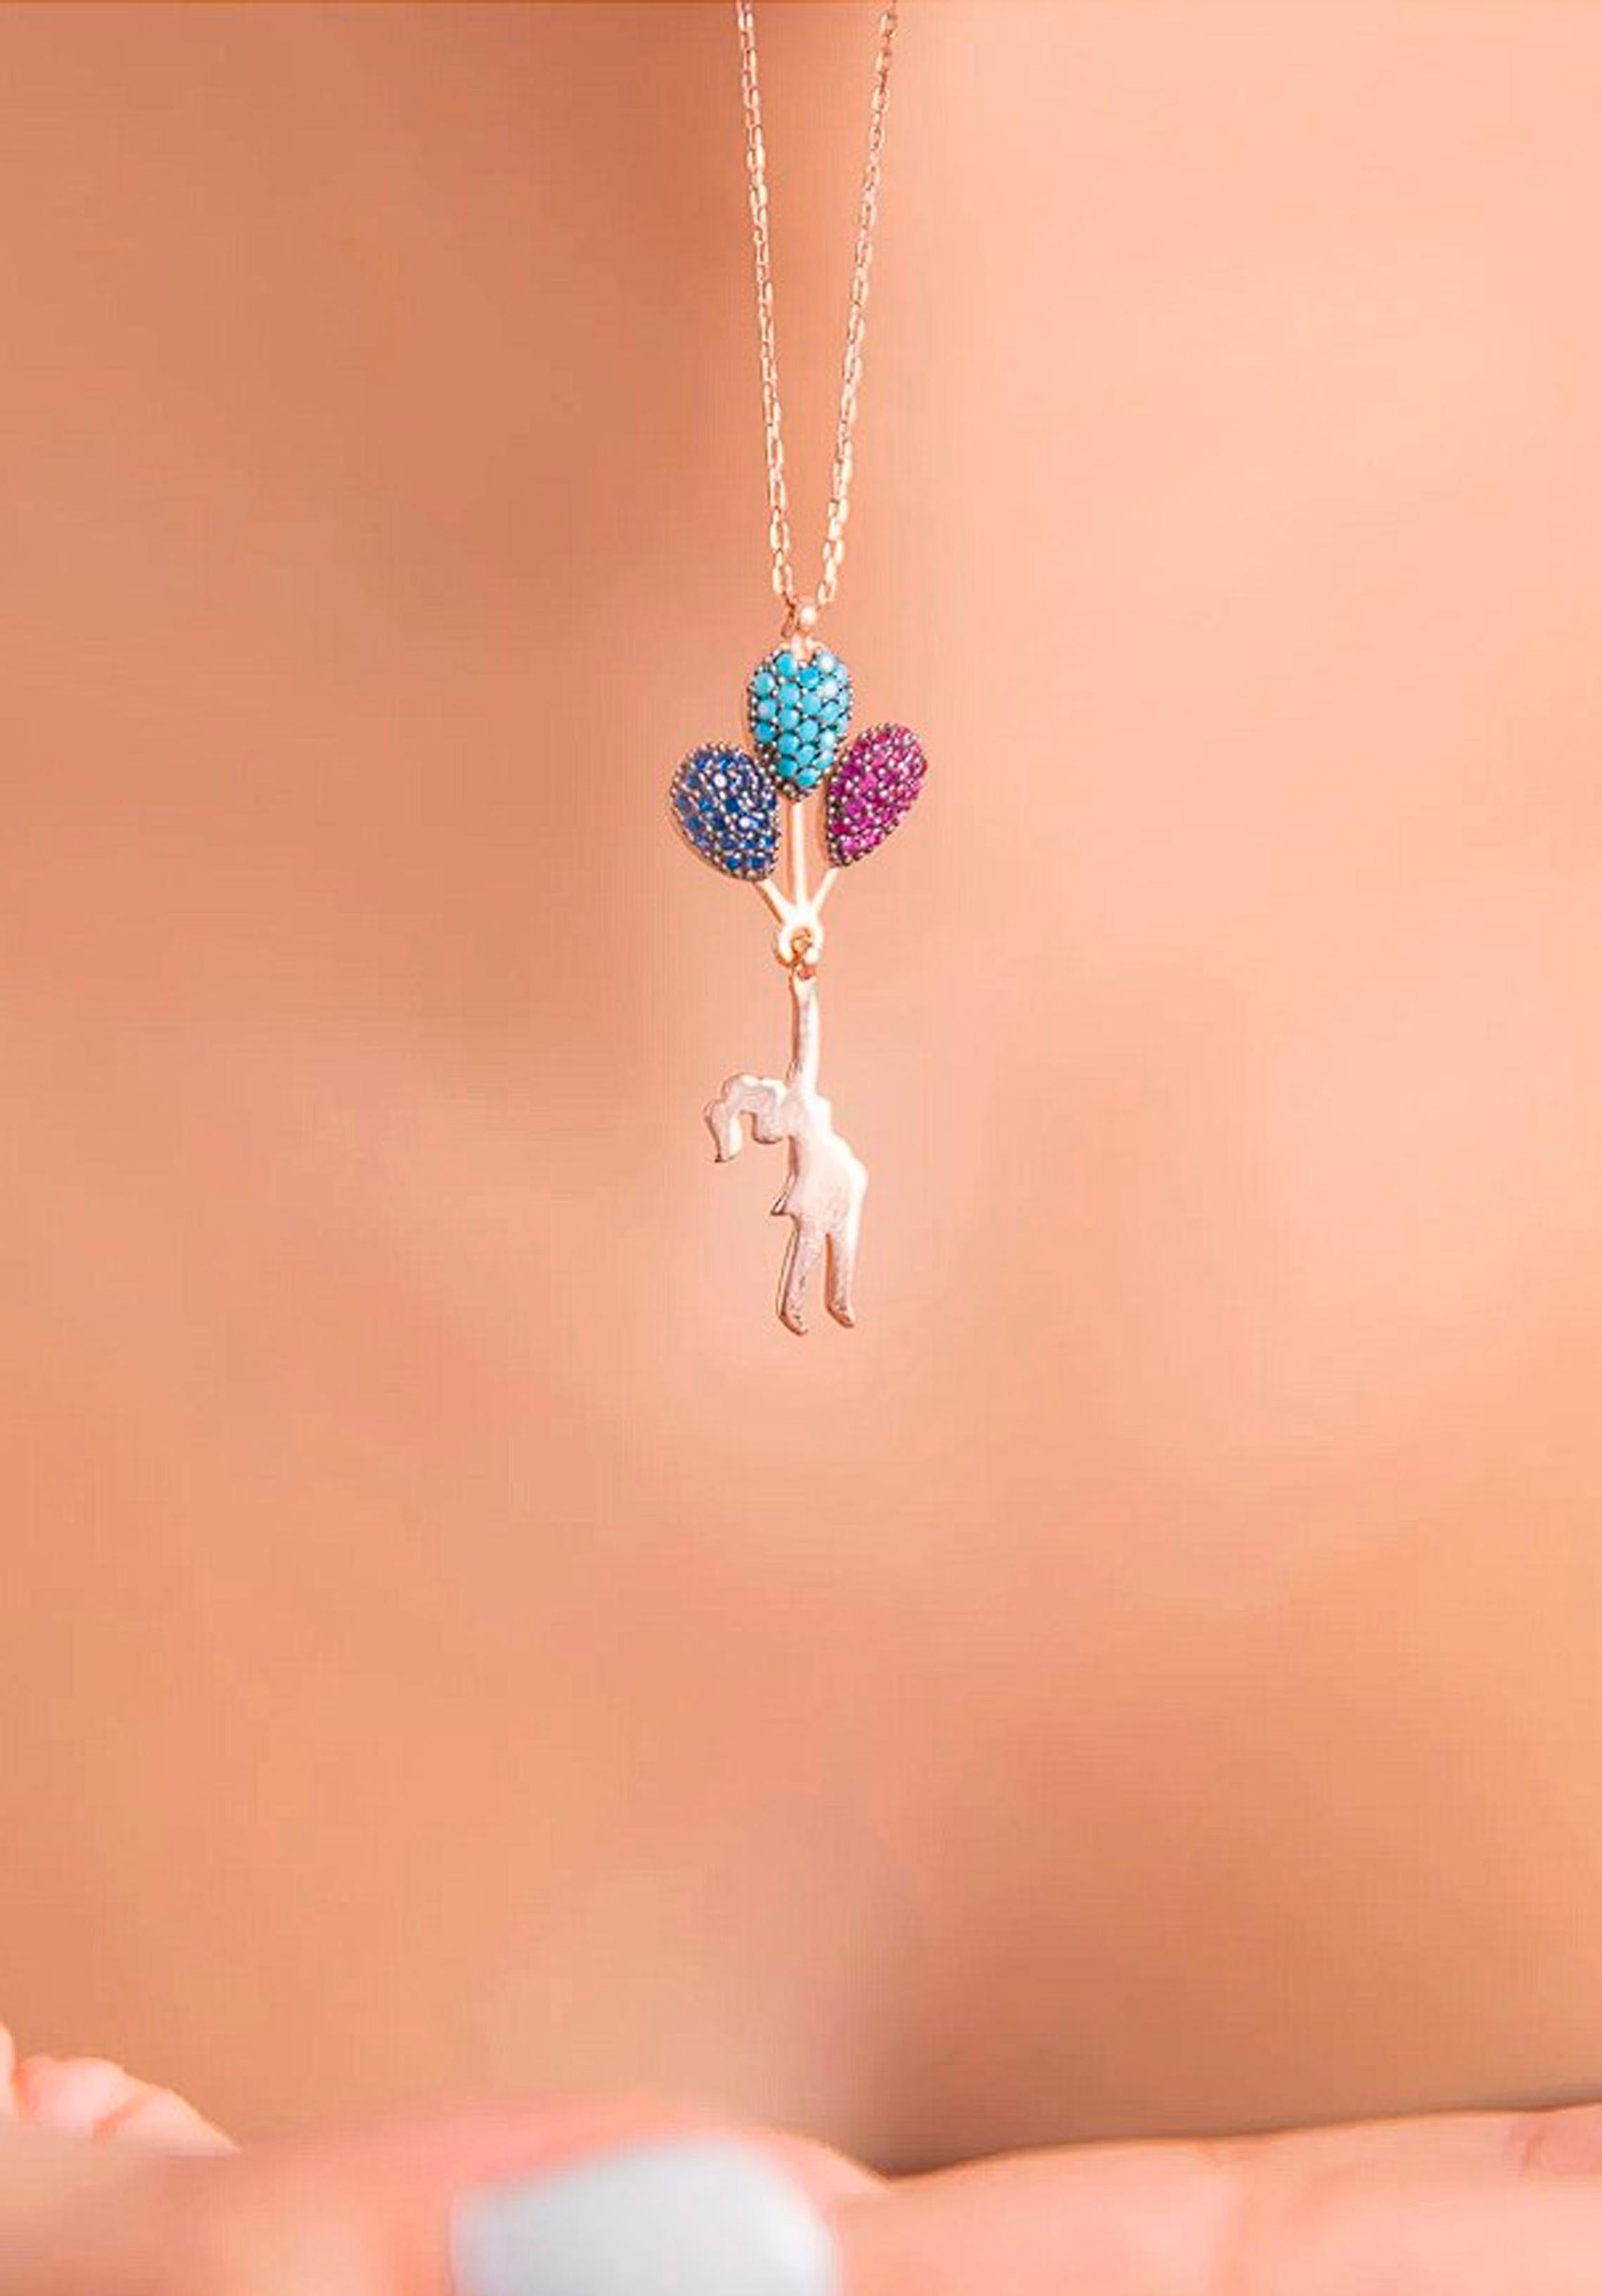 Modern Girl on baloons pendant necklace in 14k gold For Sale